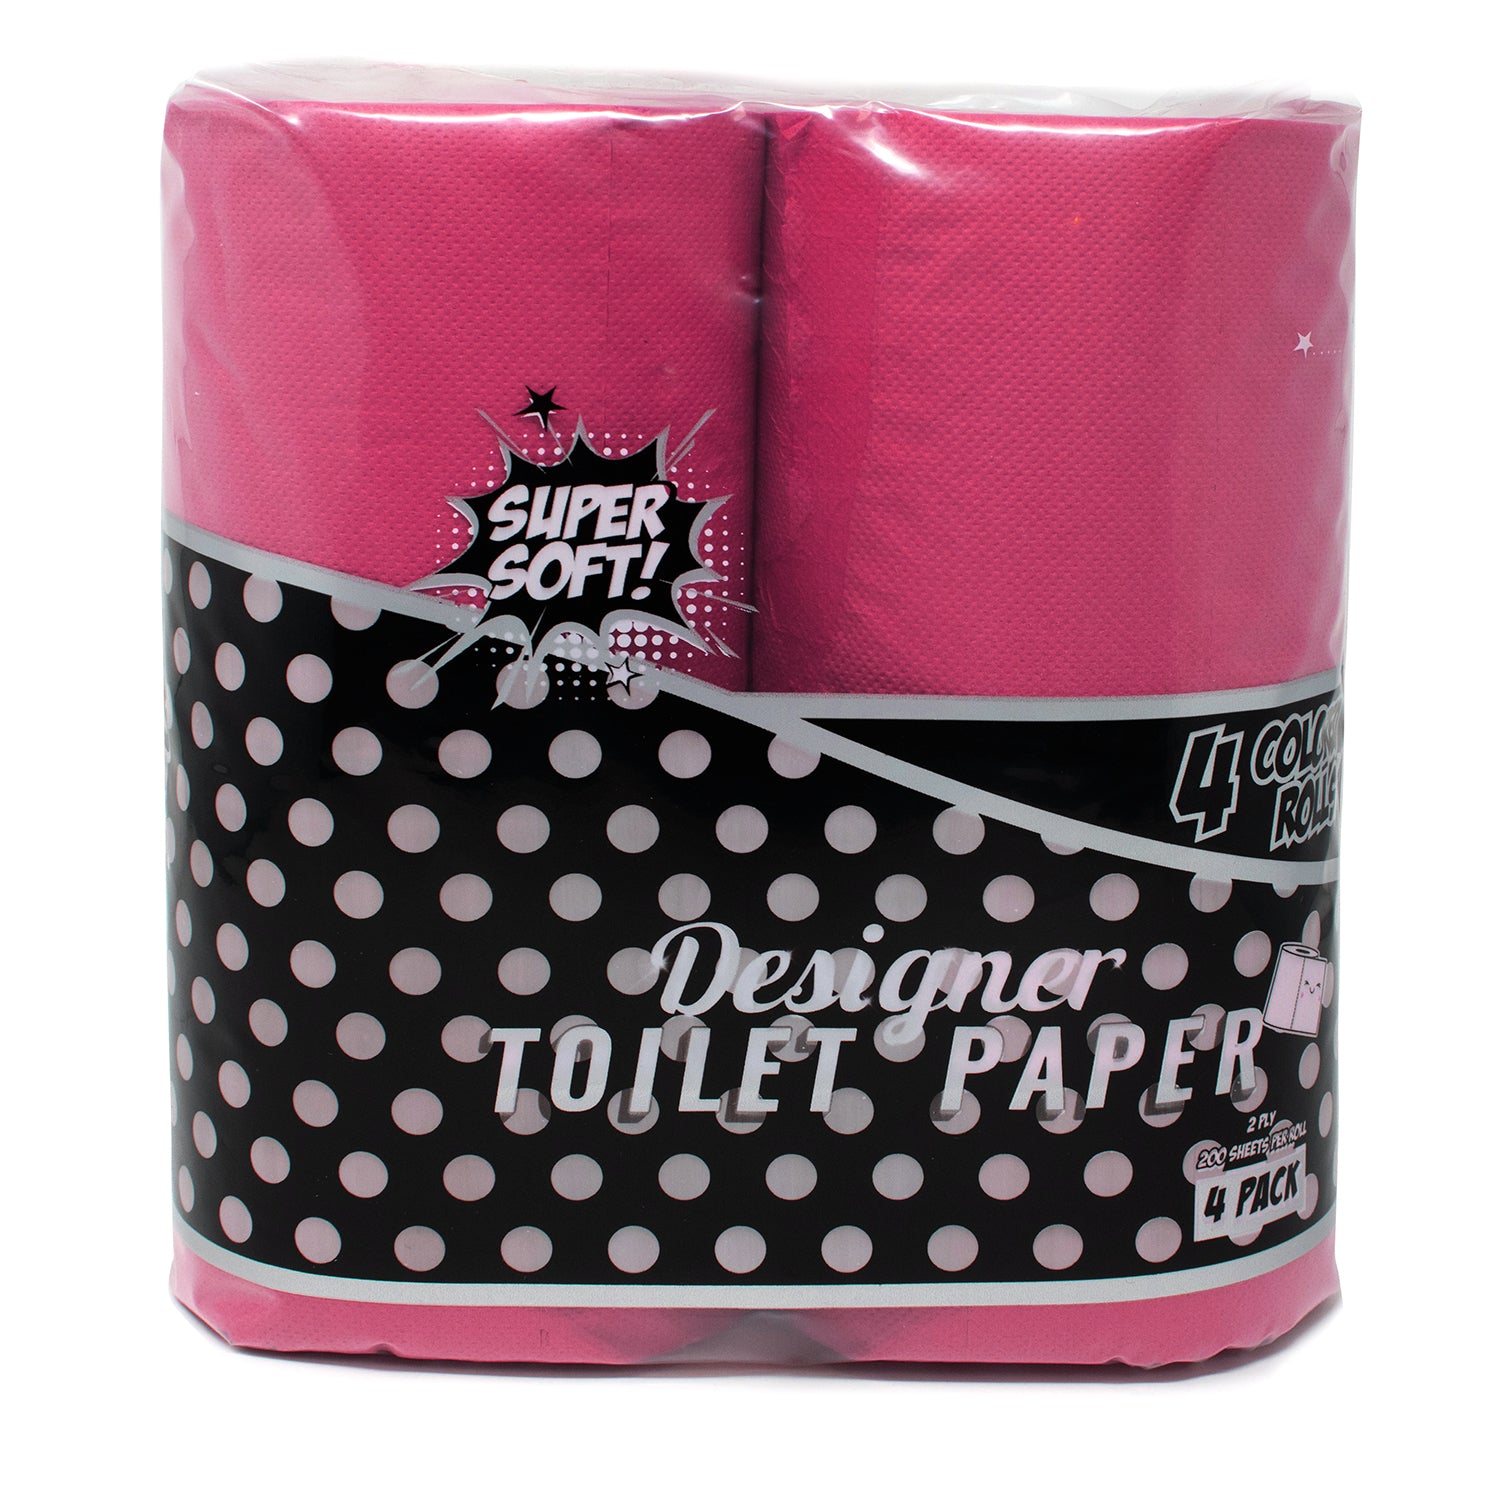 Designer Colored Toilet Paper Pink. Brighten up your bathroom in a colorful way and make your bathroom a little more exciting. Does not dye, mark or stain on your skin. This collection is made of a 2 ply sheets, adding a style, strength and softness. Flushable and septic-safe for standard sewer and septic systems. Other colors available. 